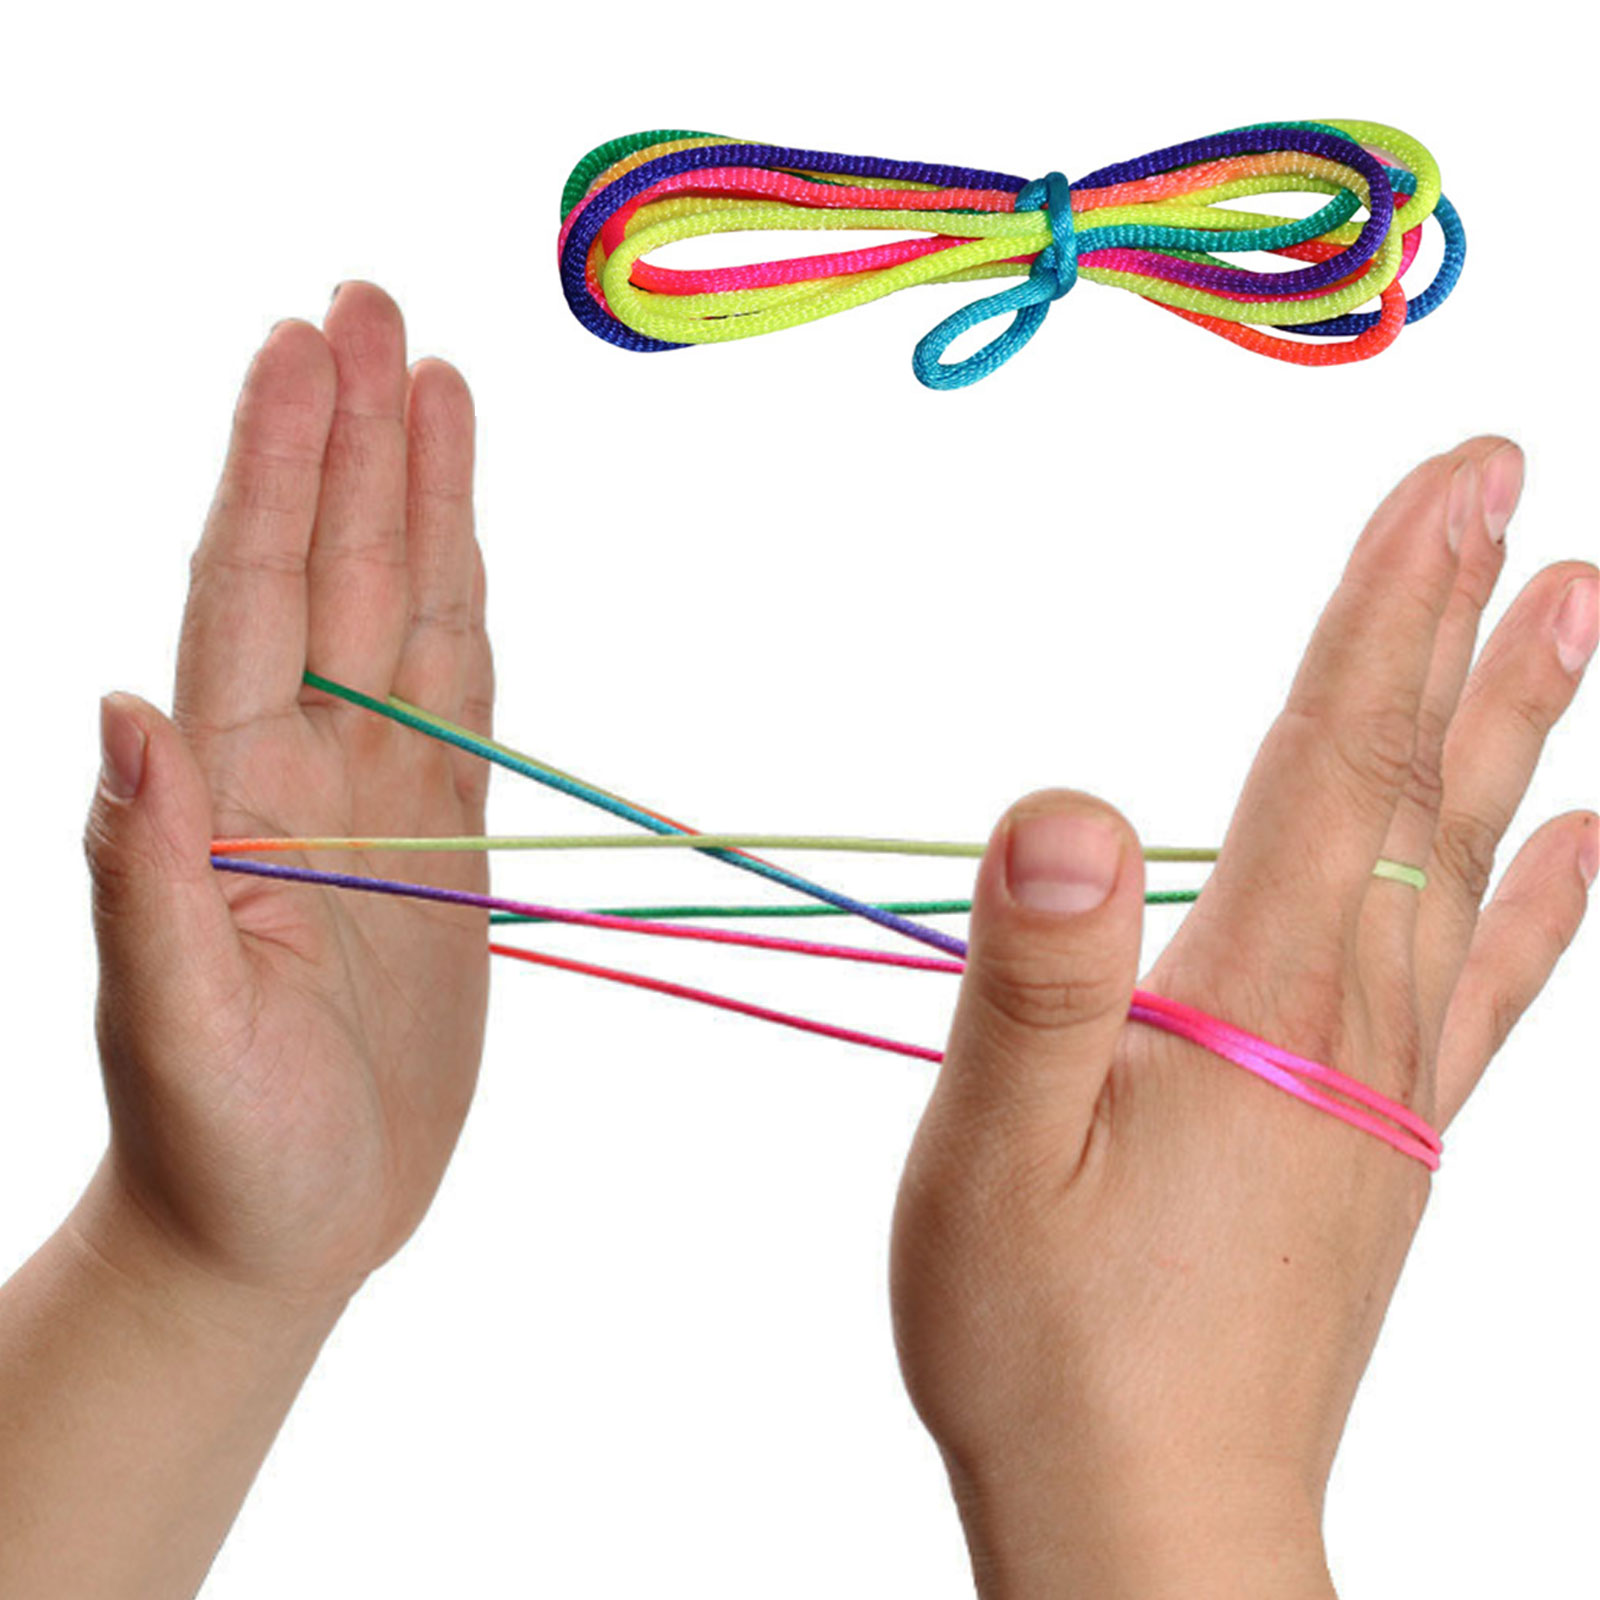 Uspeedy 65 Inch Long 12 Colors 12 Pieces Cats Cradle String String Hand Game Finger String Toy Supplies 